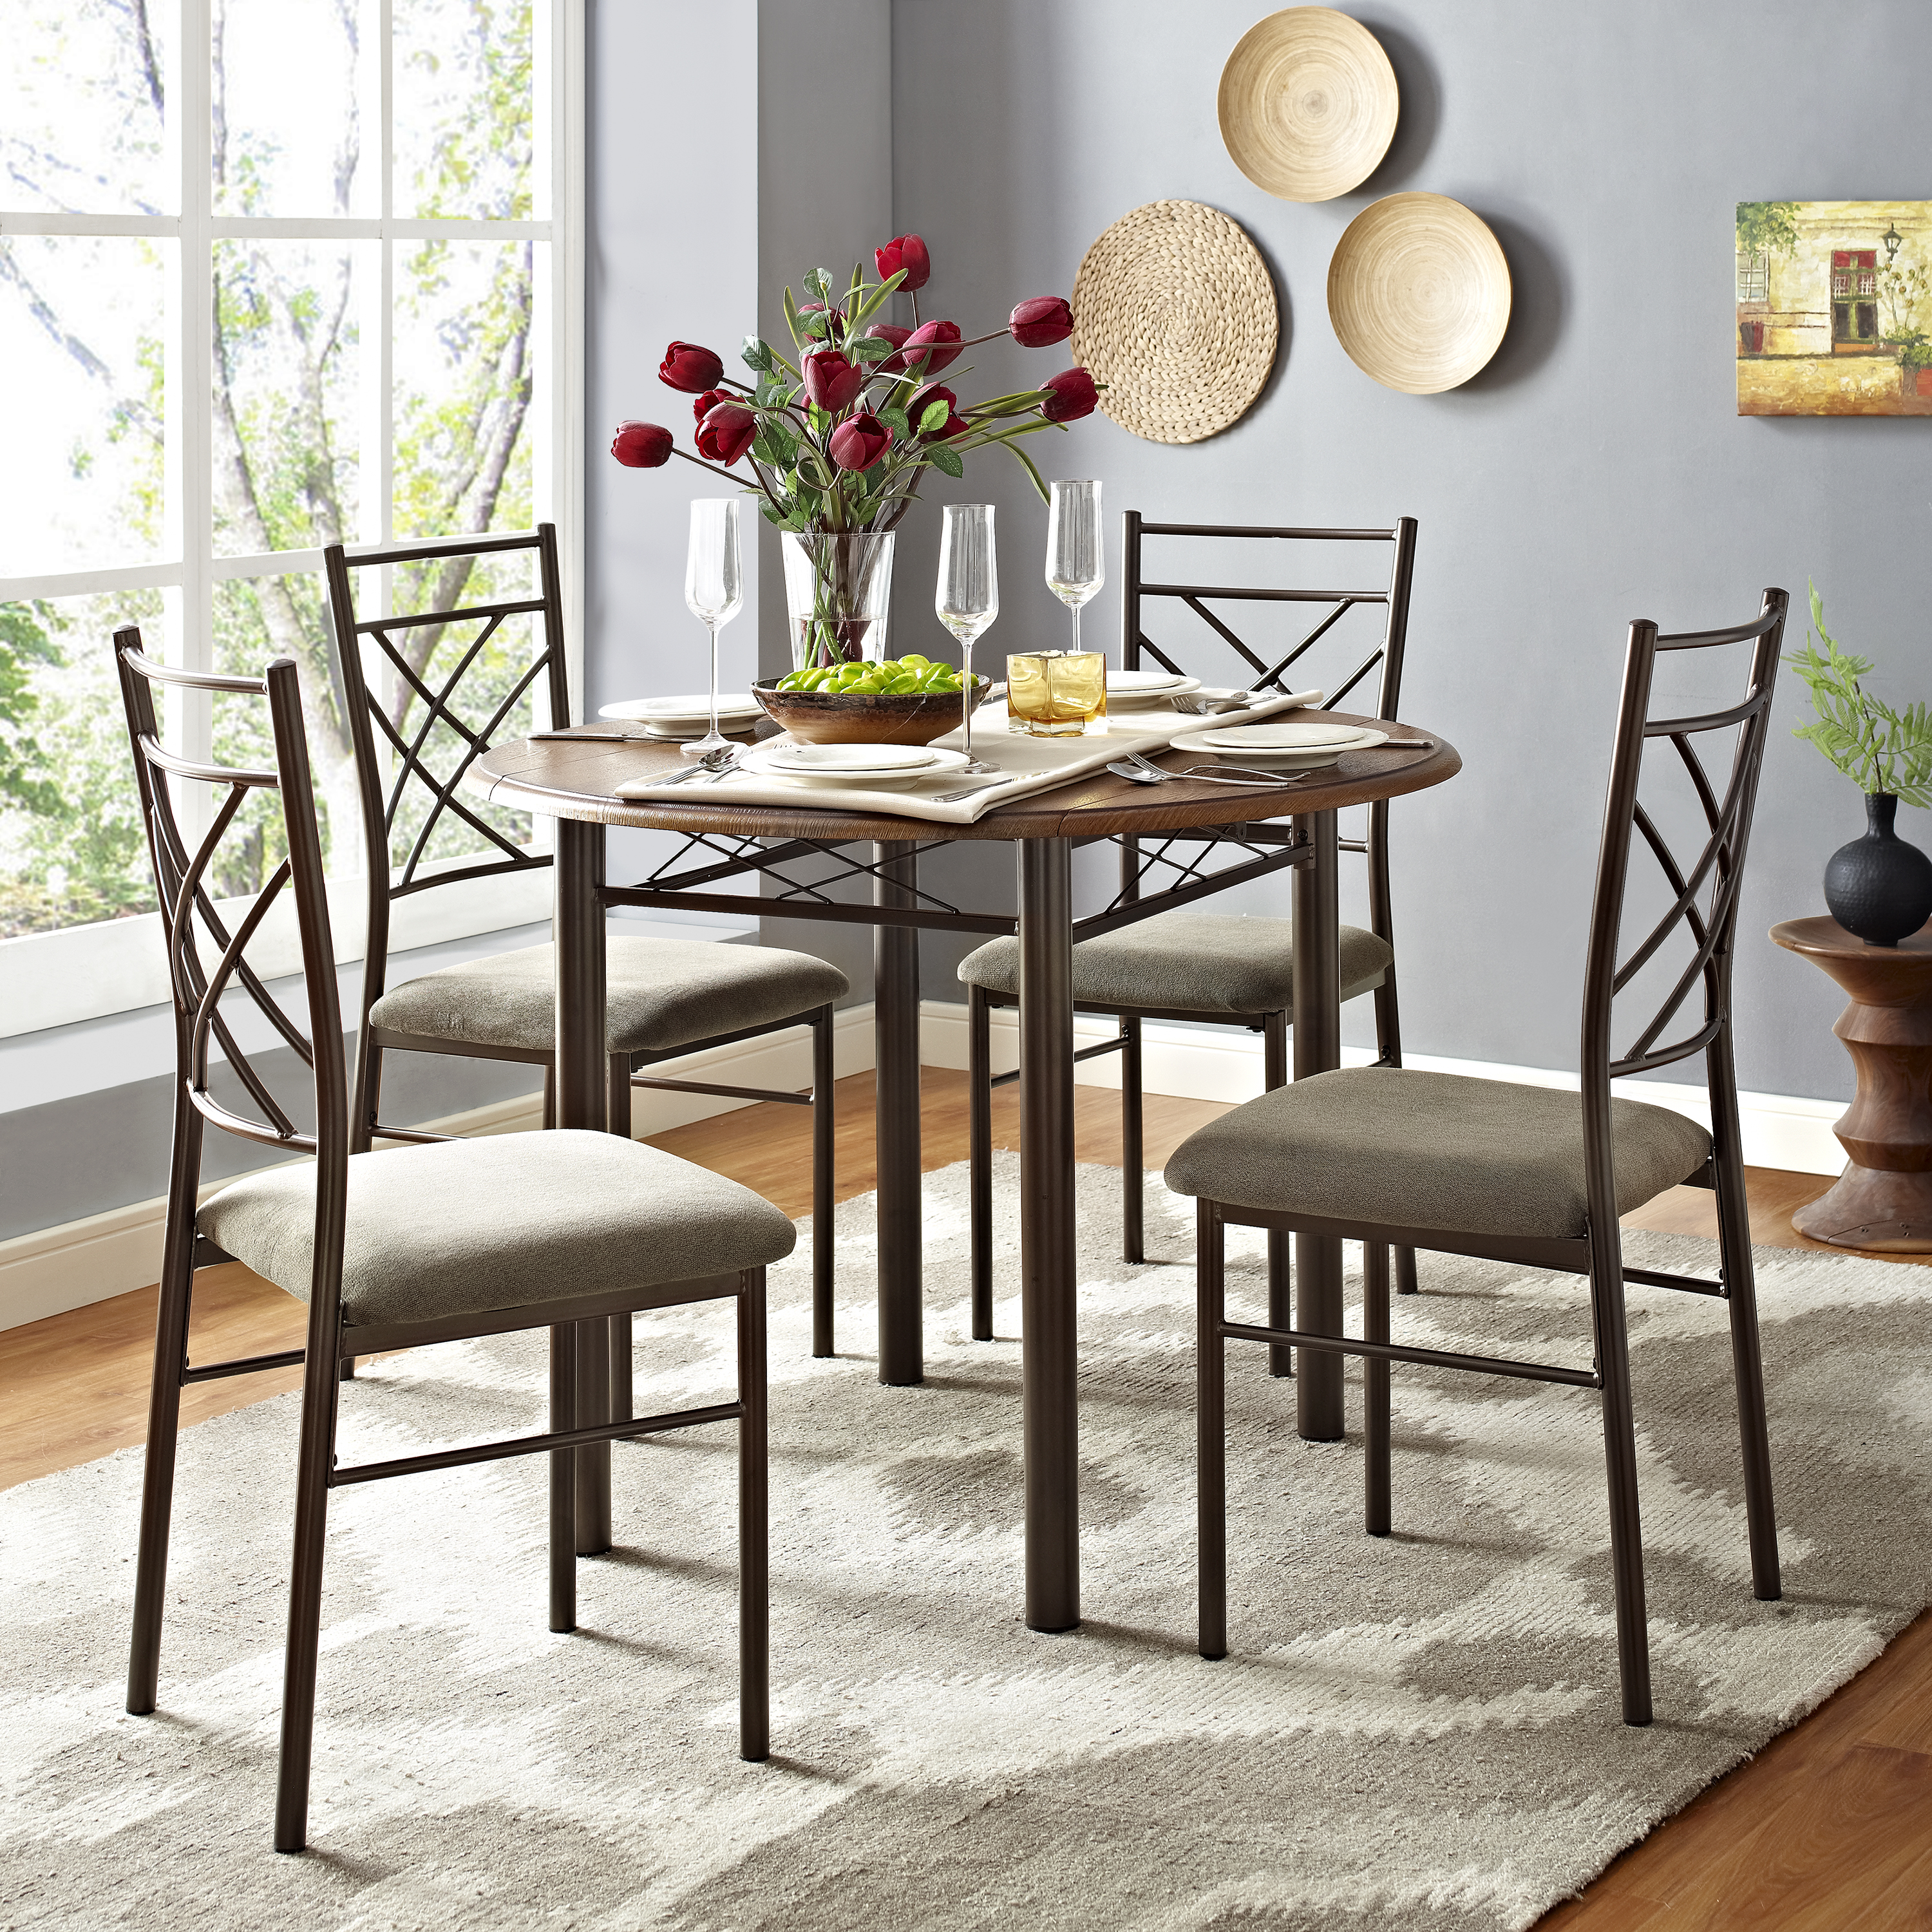 Small Dining Table Sets Kmart, Kmart Dining Room Table And Chairs